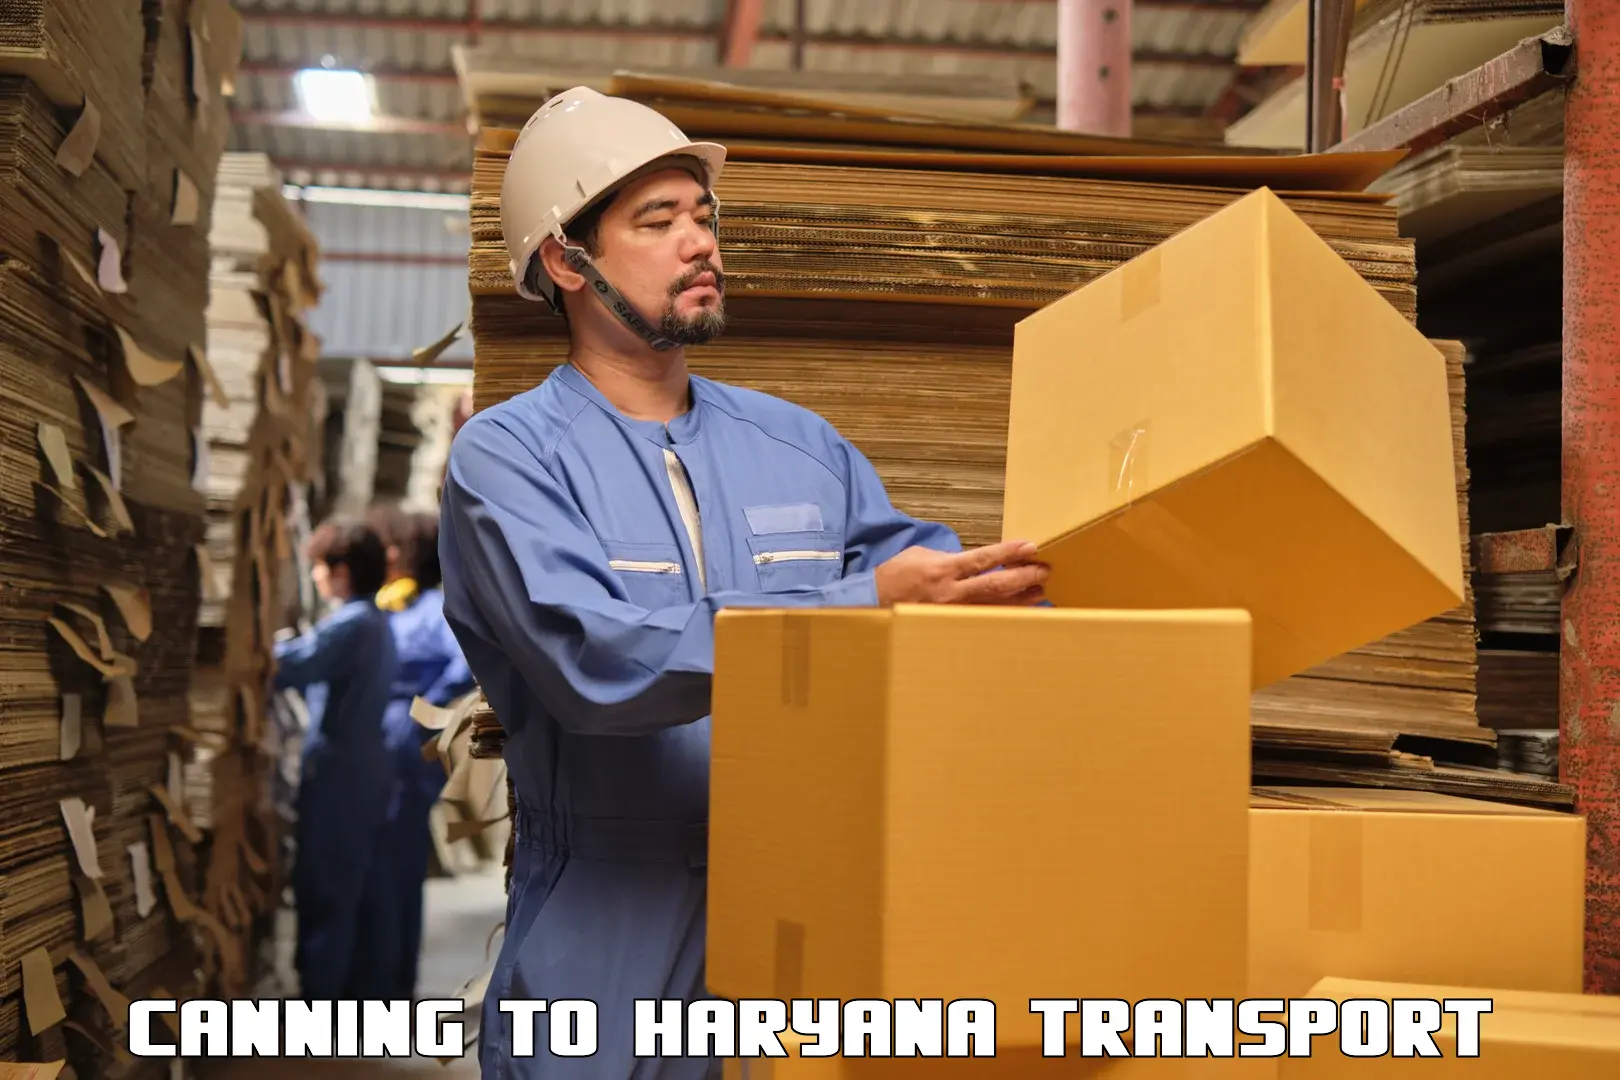 Transport in sharing Canning to Haryana